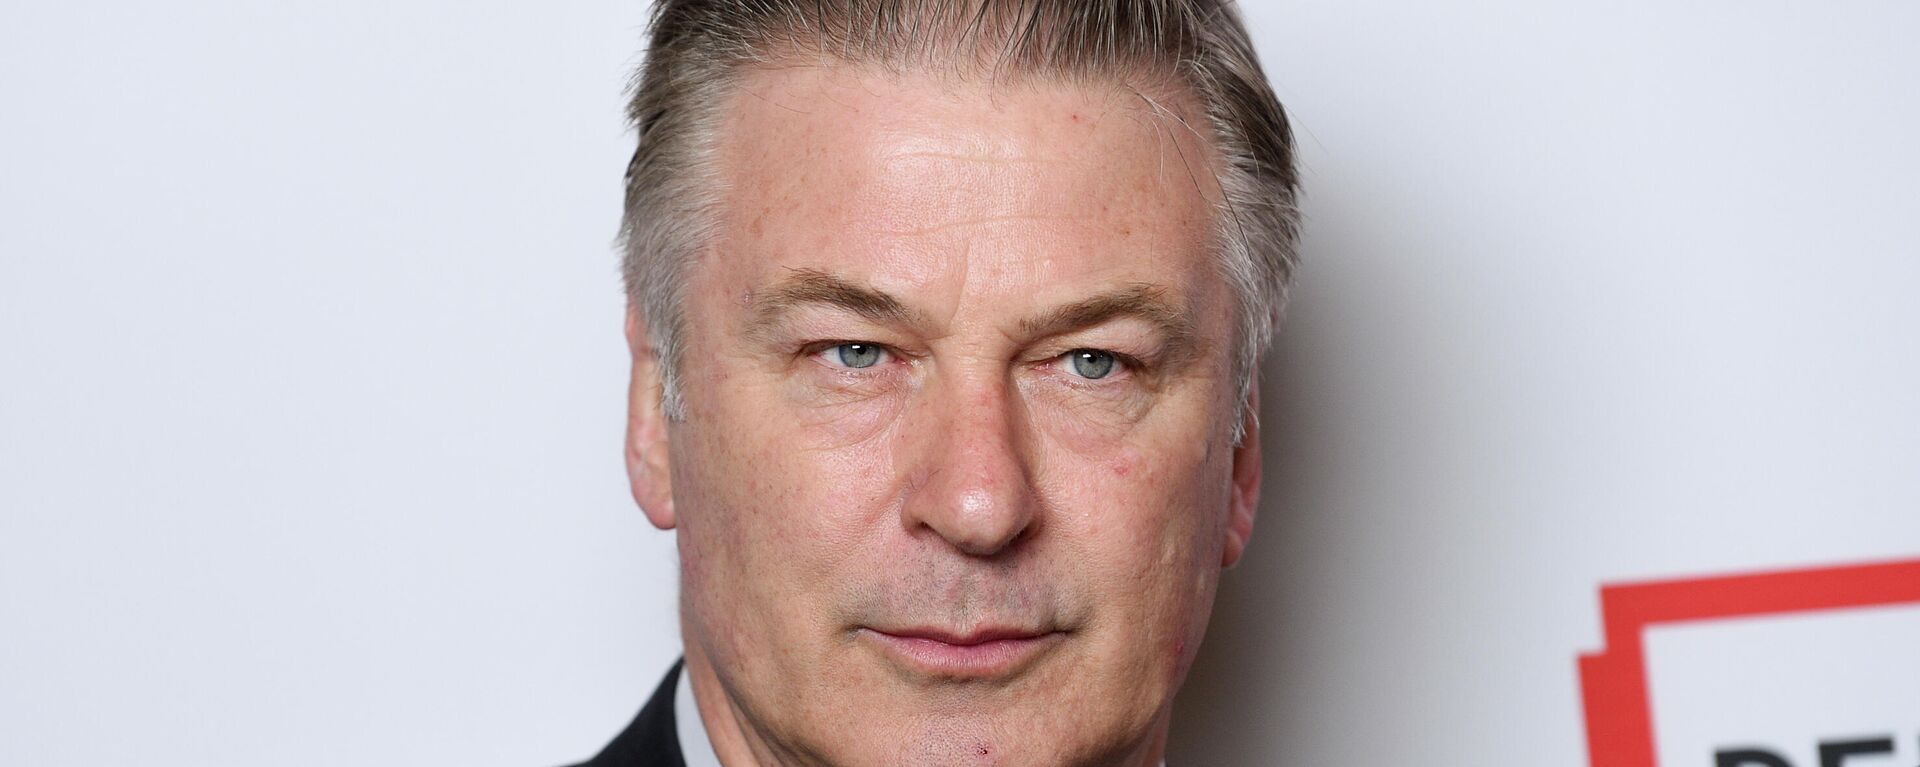 Actor Alec Baldwin attends the 2019 PEN America Literary Gala at the American Museum of Natural History on Tuesday, May 21, 2019, in New York. - Sputnik International, 1920, 20.02.2022